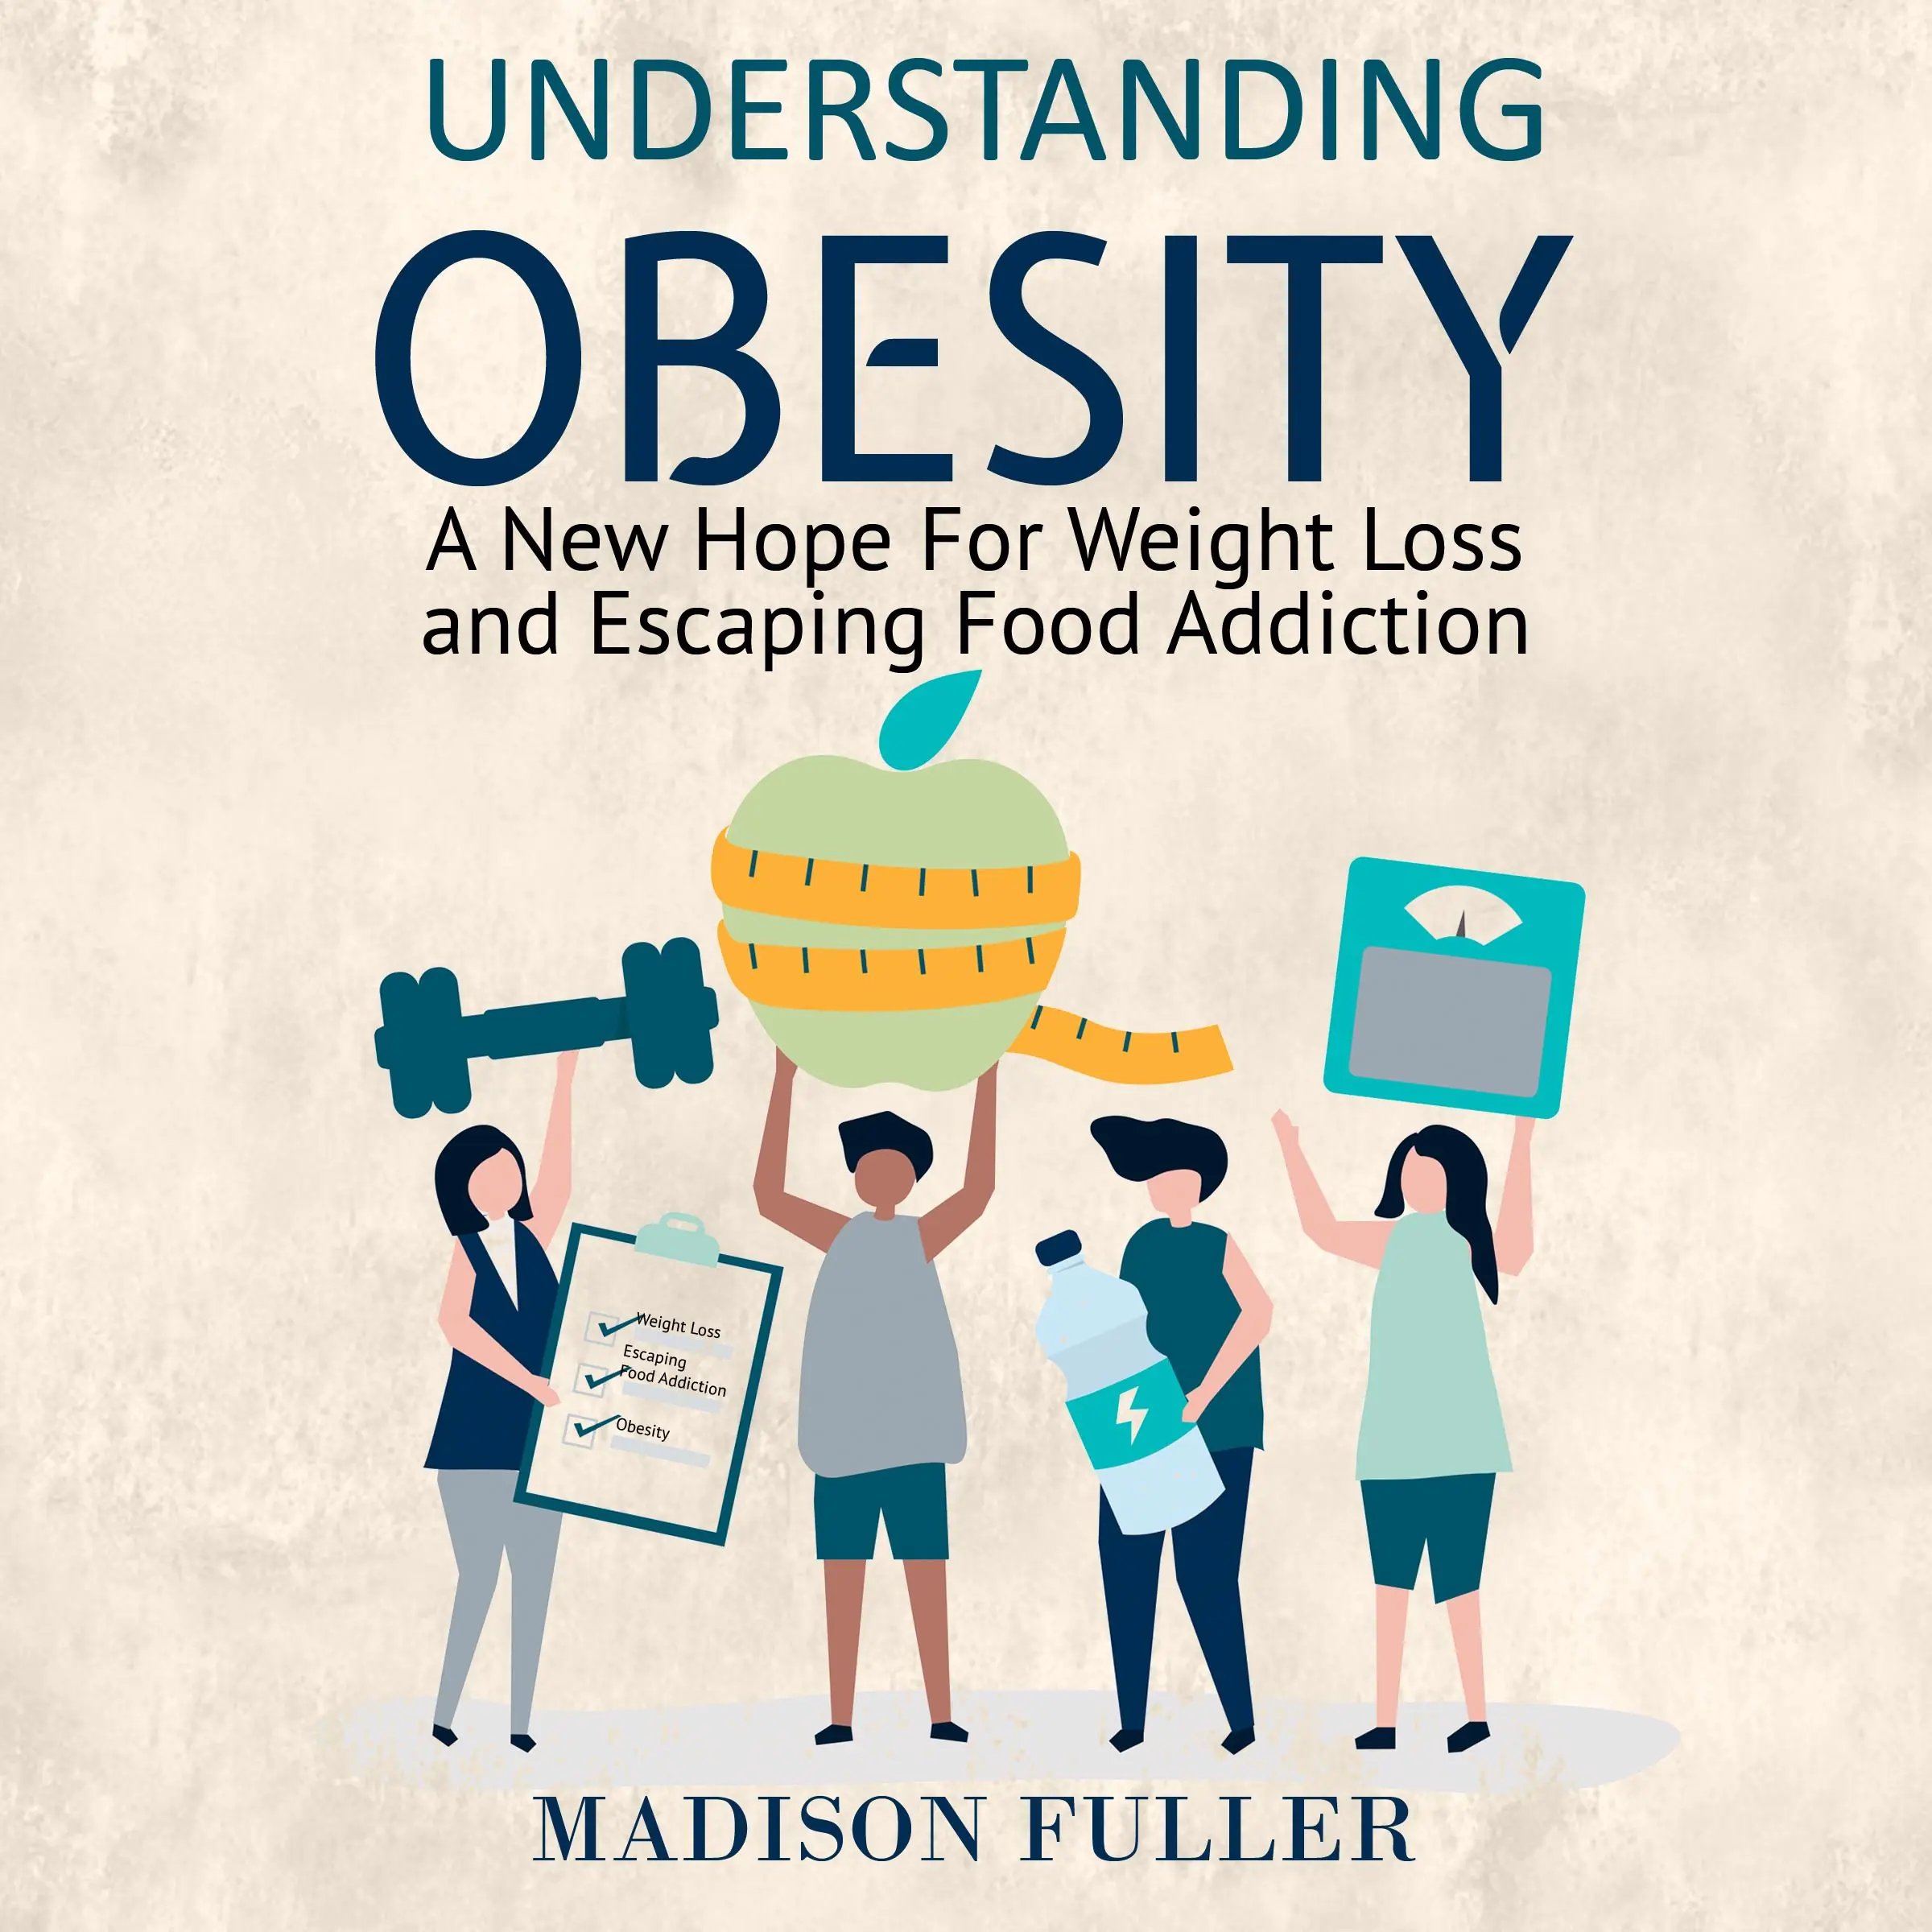 Understanding Obesity: A New Hope For Weight Loss and Escaping Food Addiction Audiobook by Madison Fuller